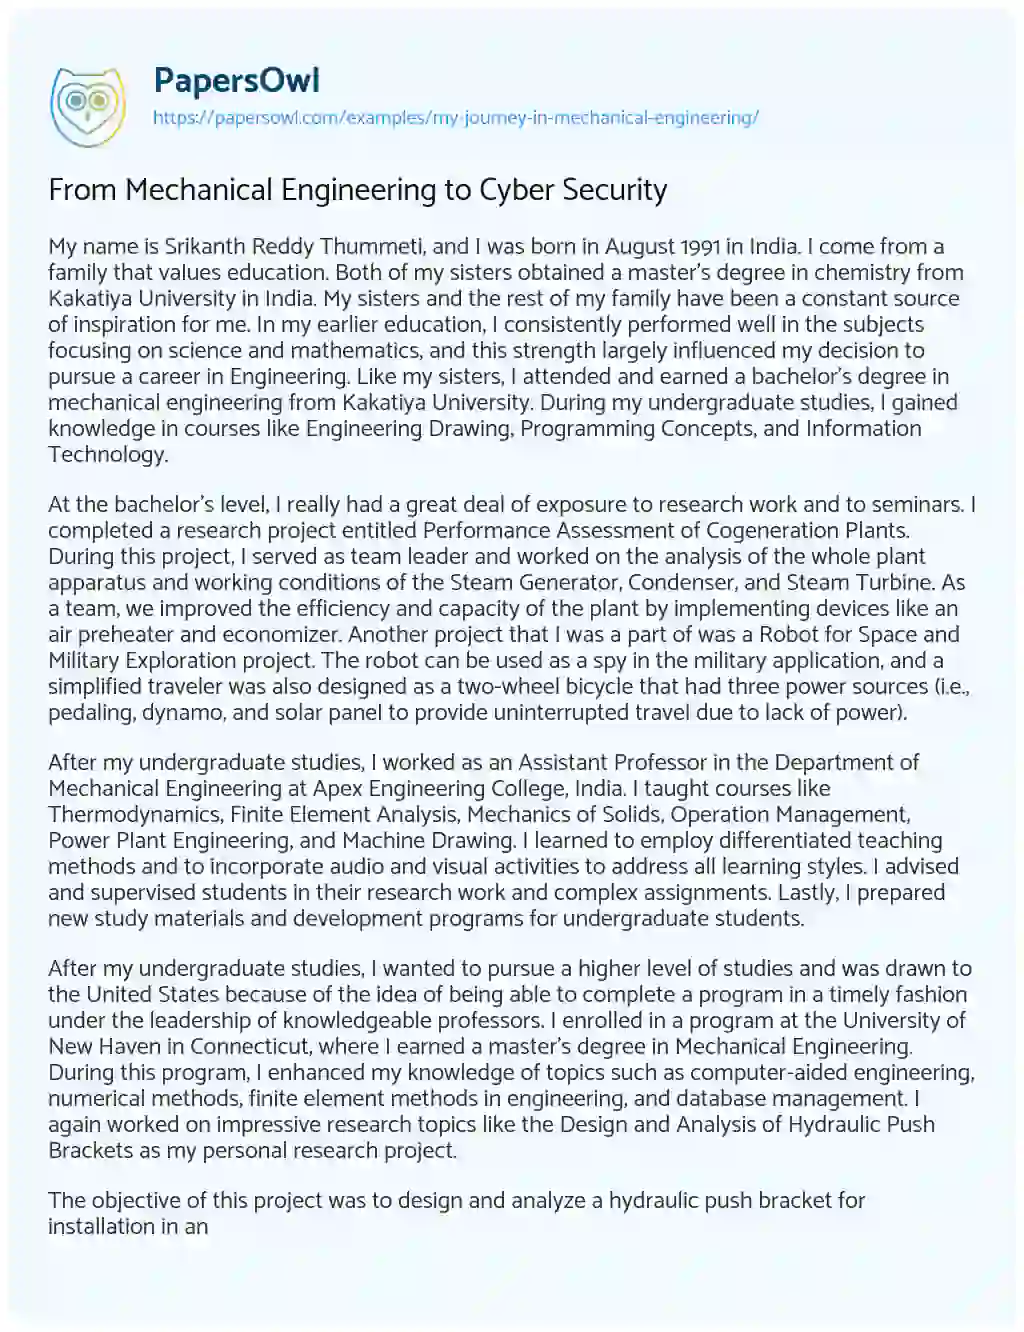 Essay on From Mechanical Engineering to Cyber Security